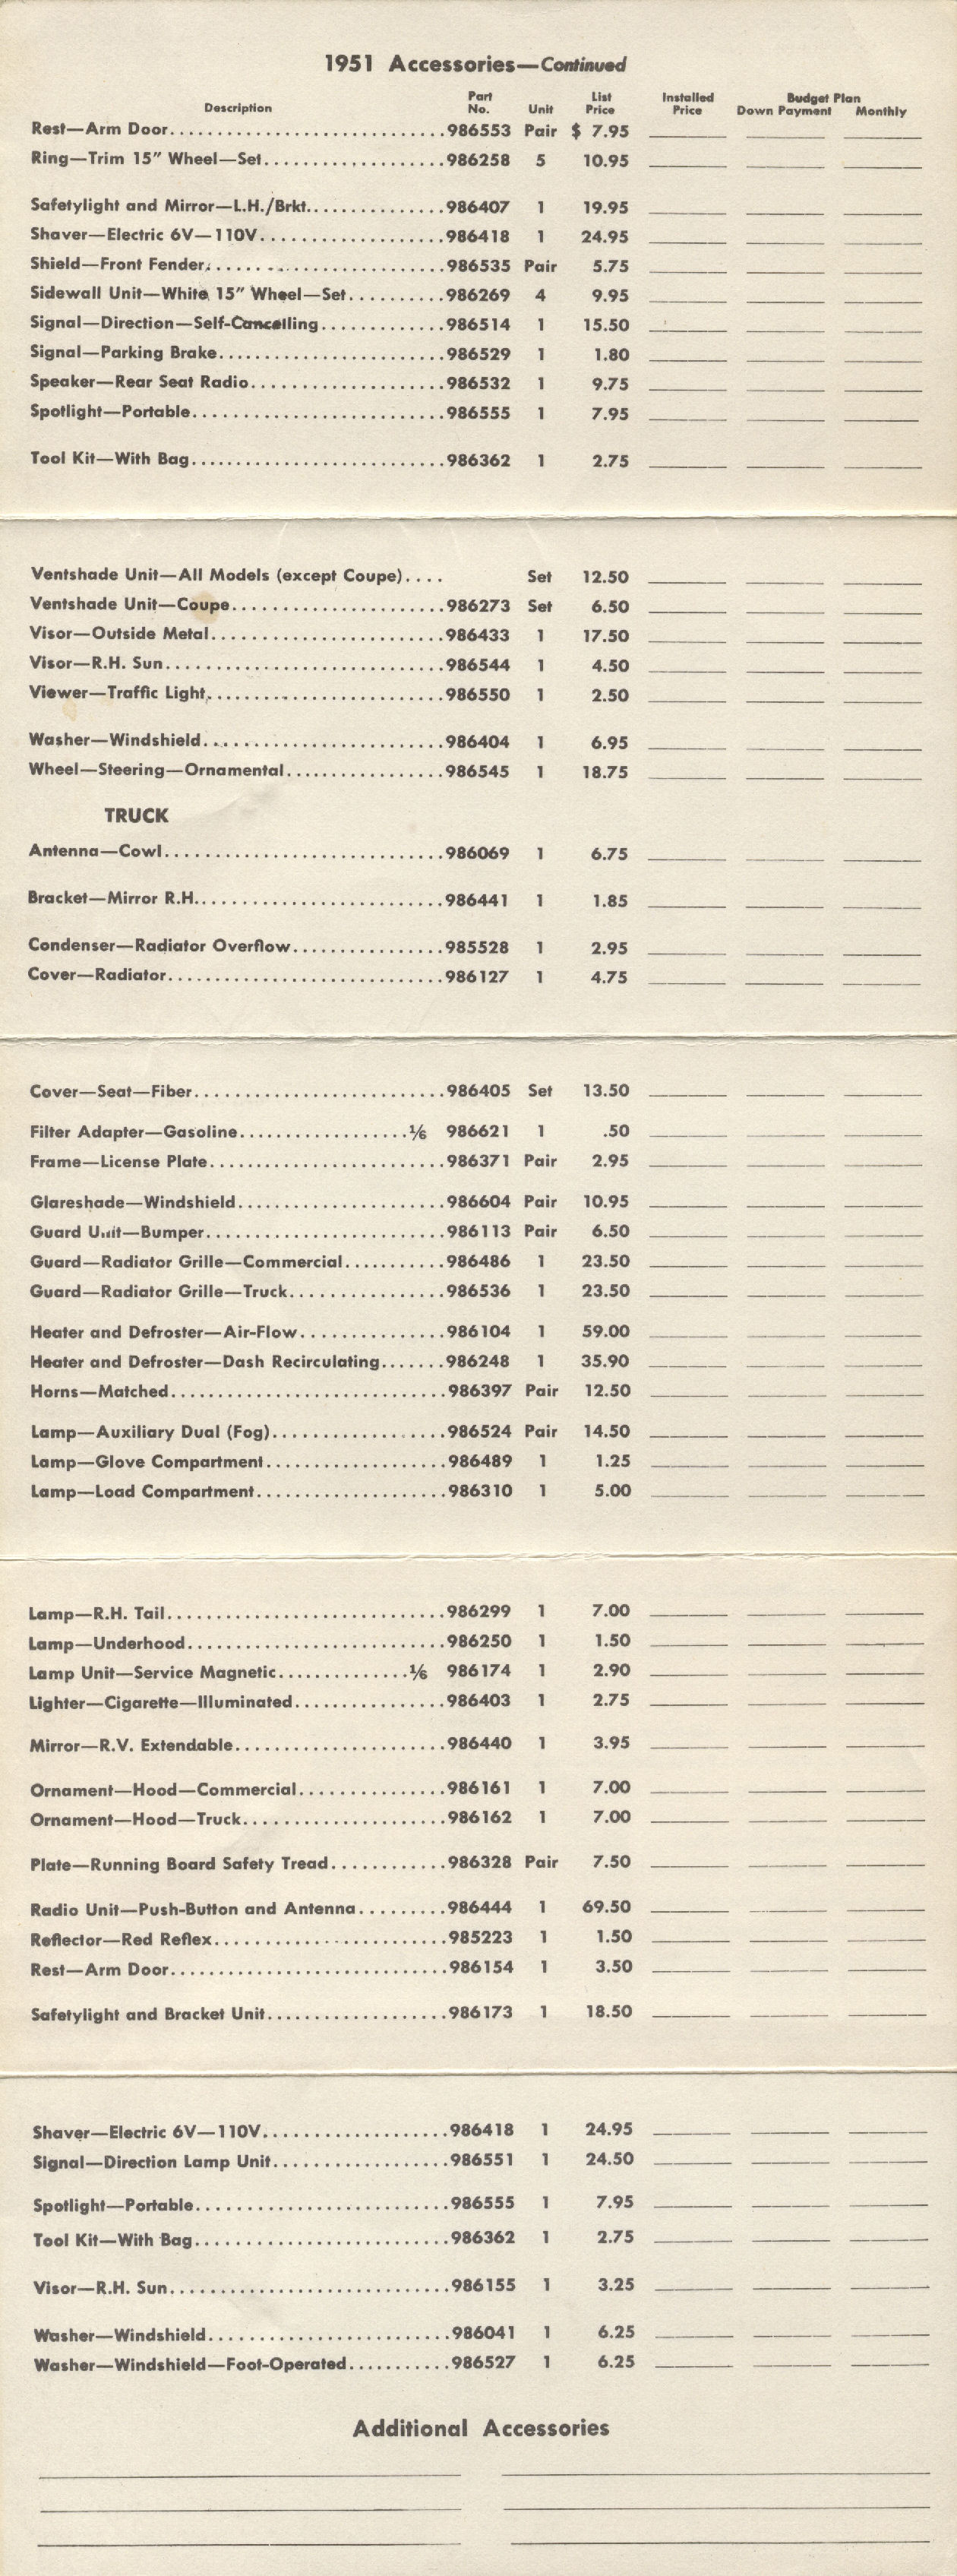 1951 Chevrolet Accessories Price List Page 2